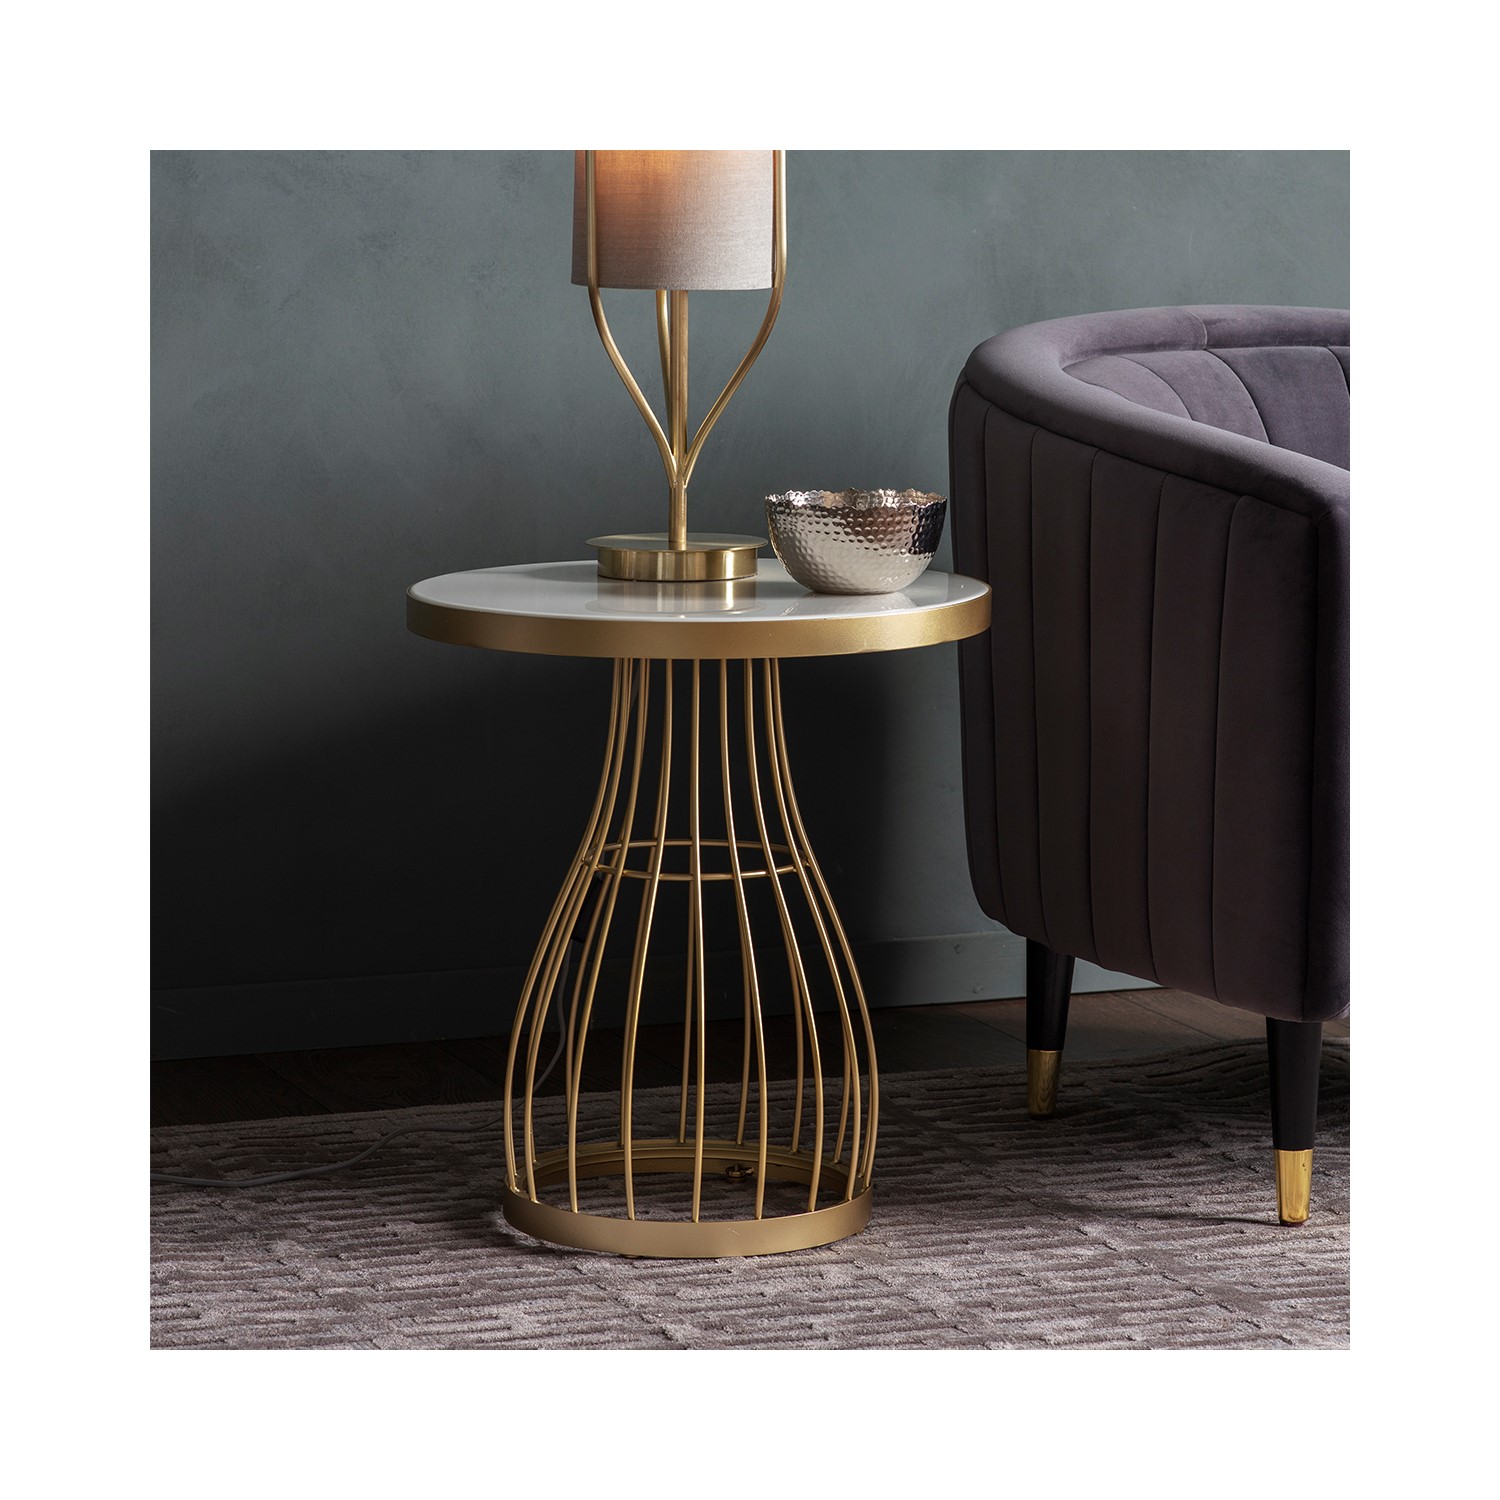 Photo of Gold side table with white marble top - caspian house